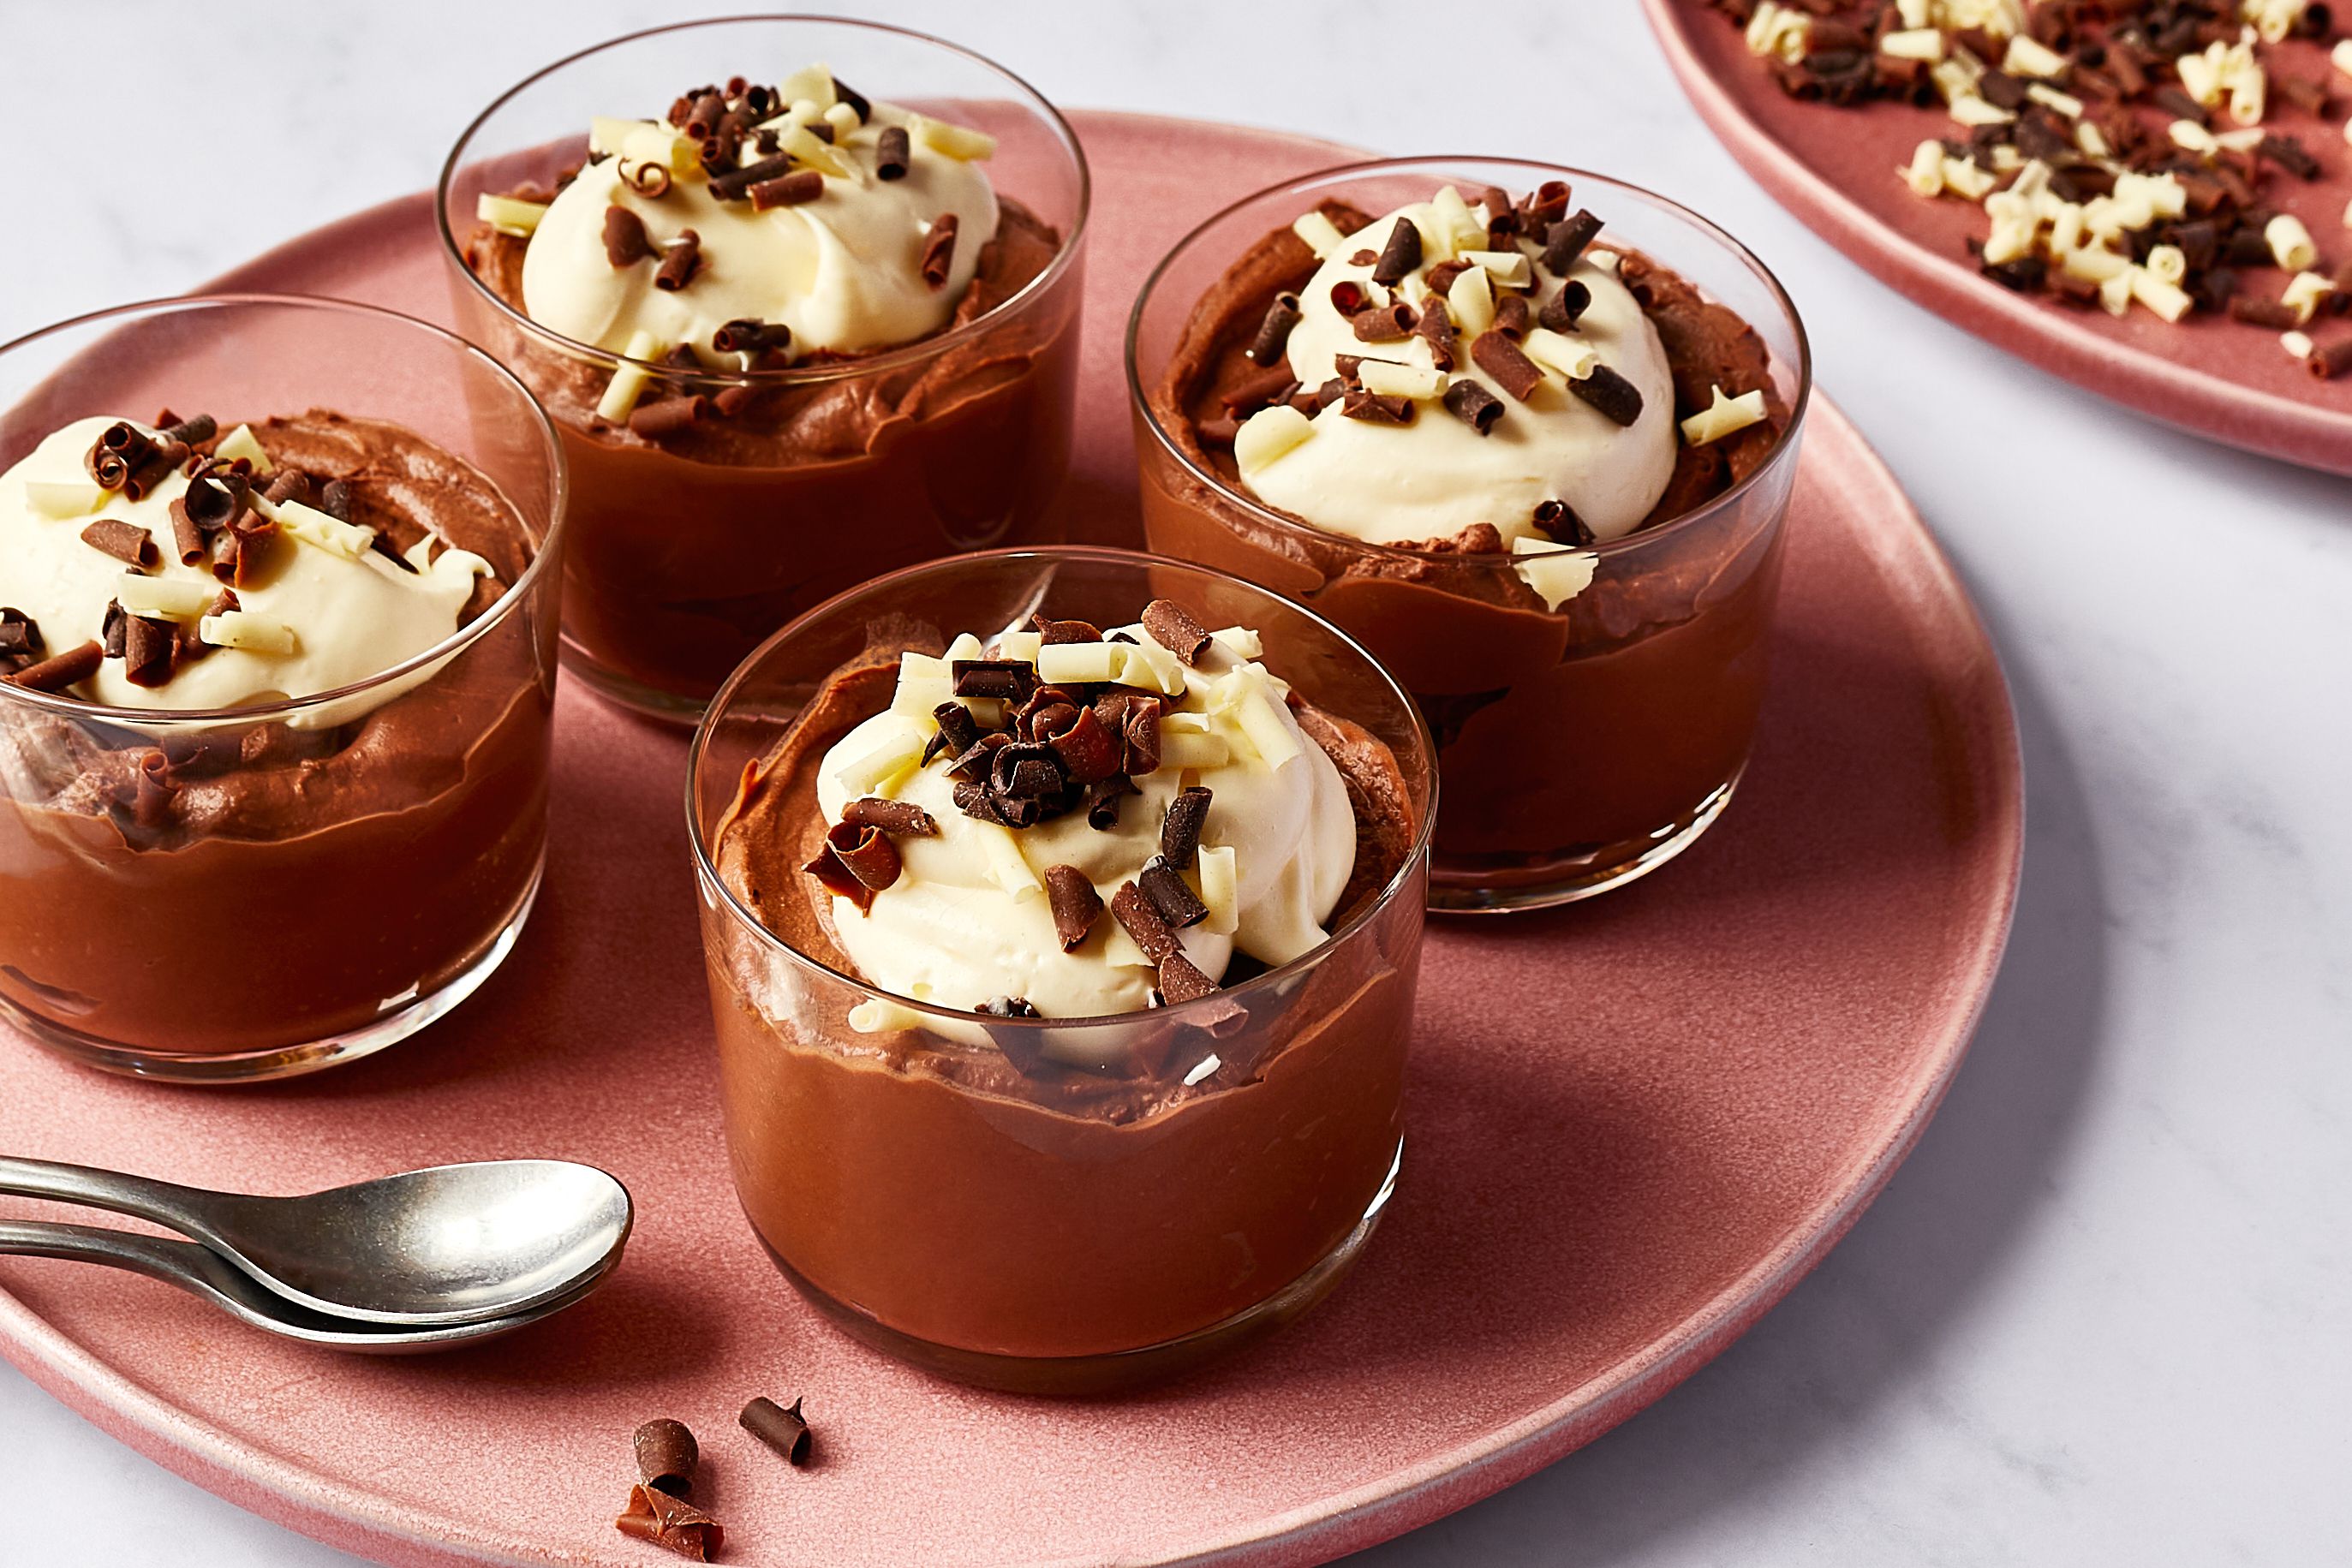 10-Minute Chocolate Mousse